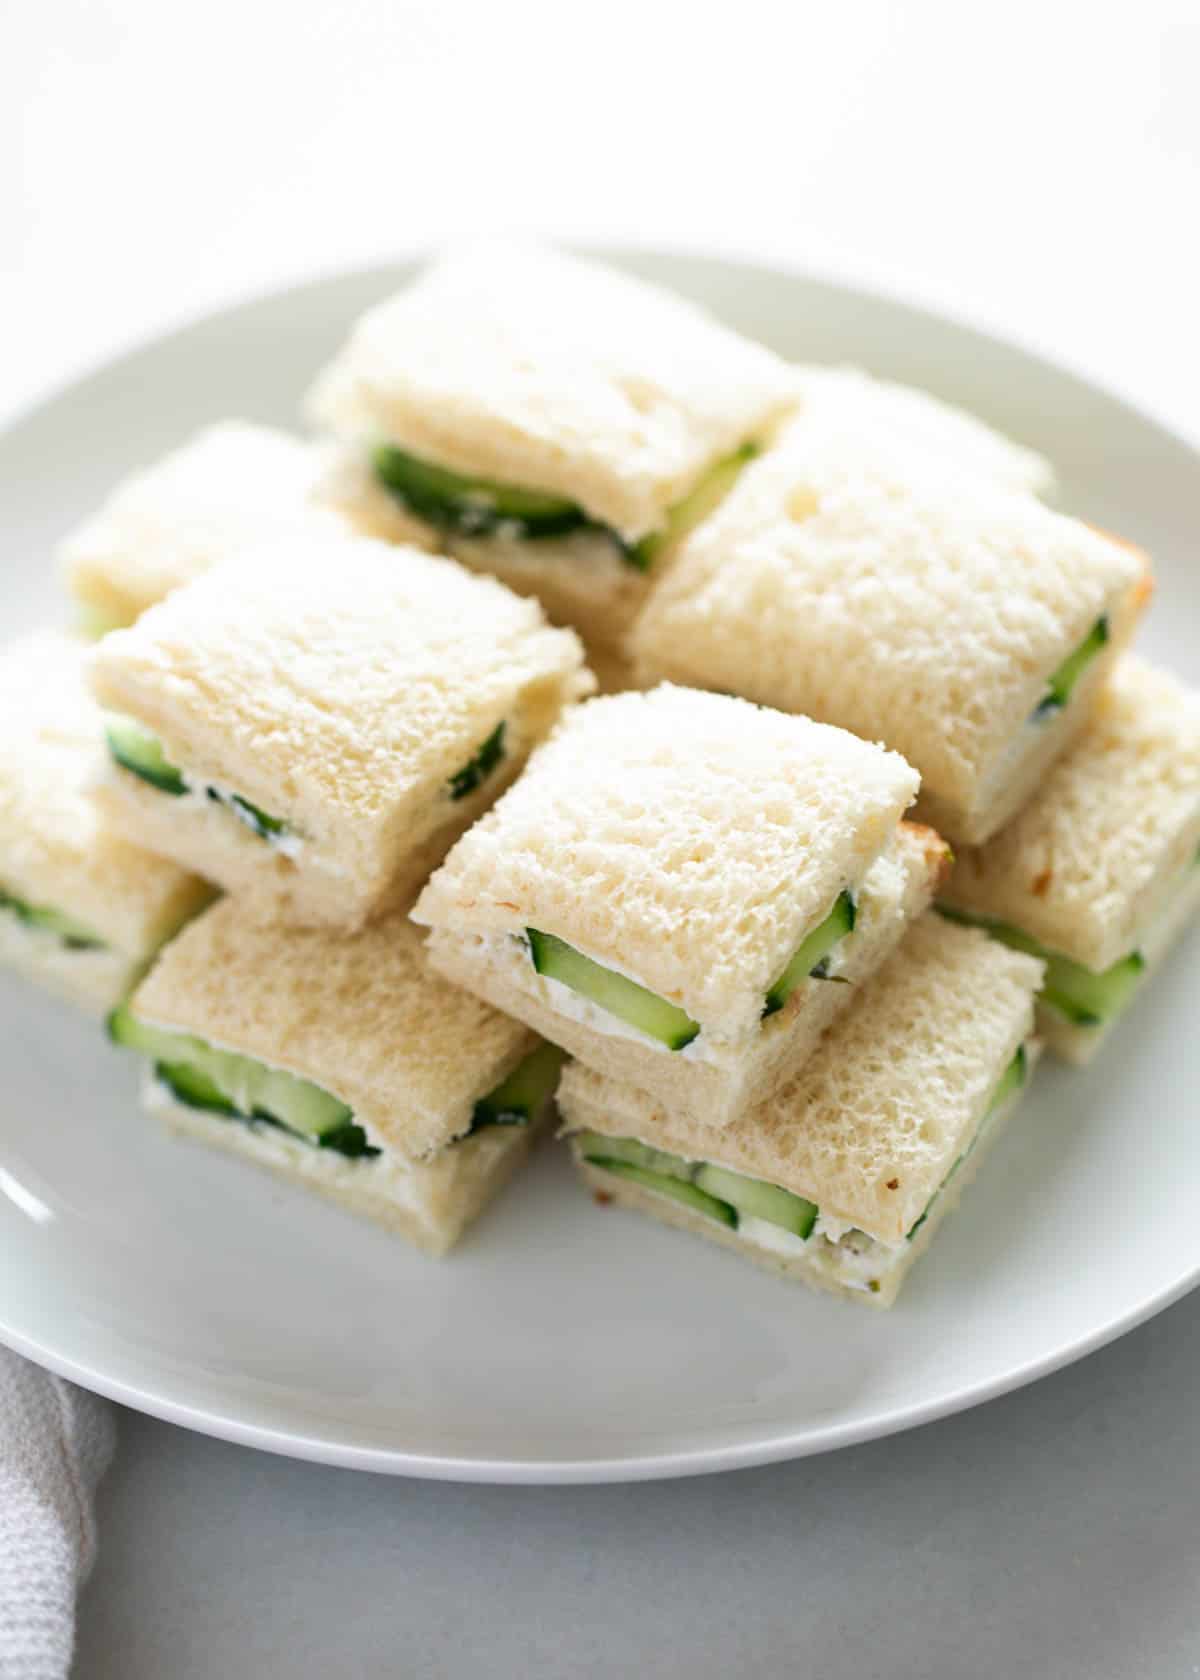 Cucumber sandwiches on a plate.